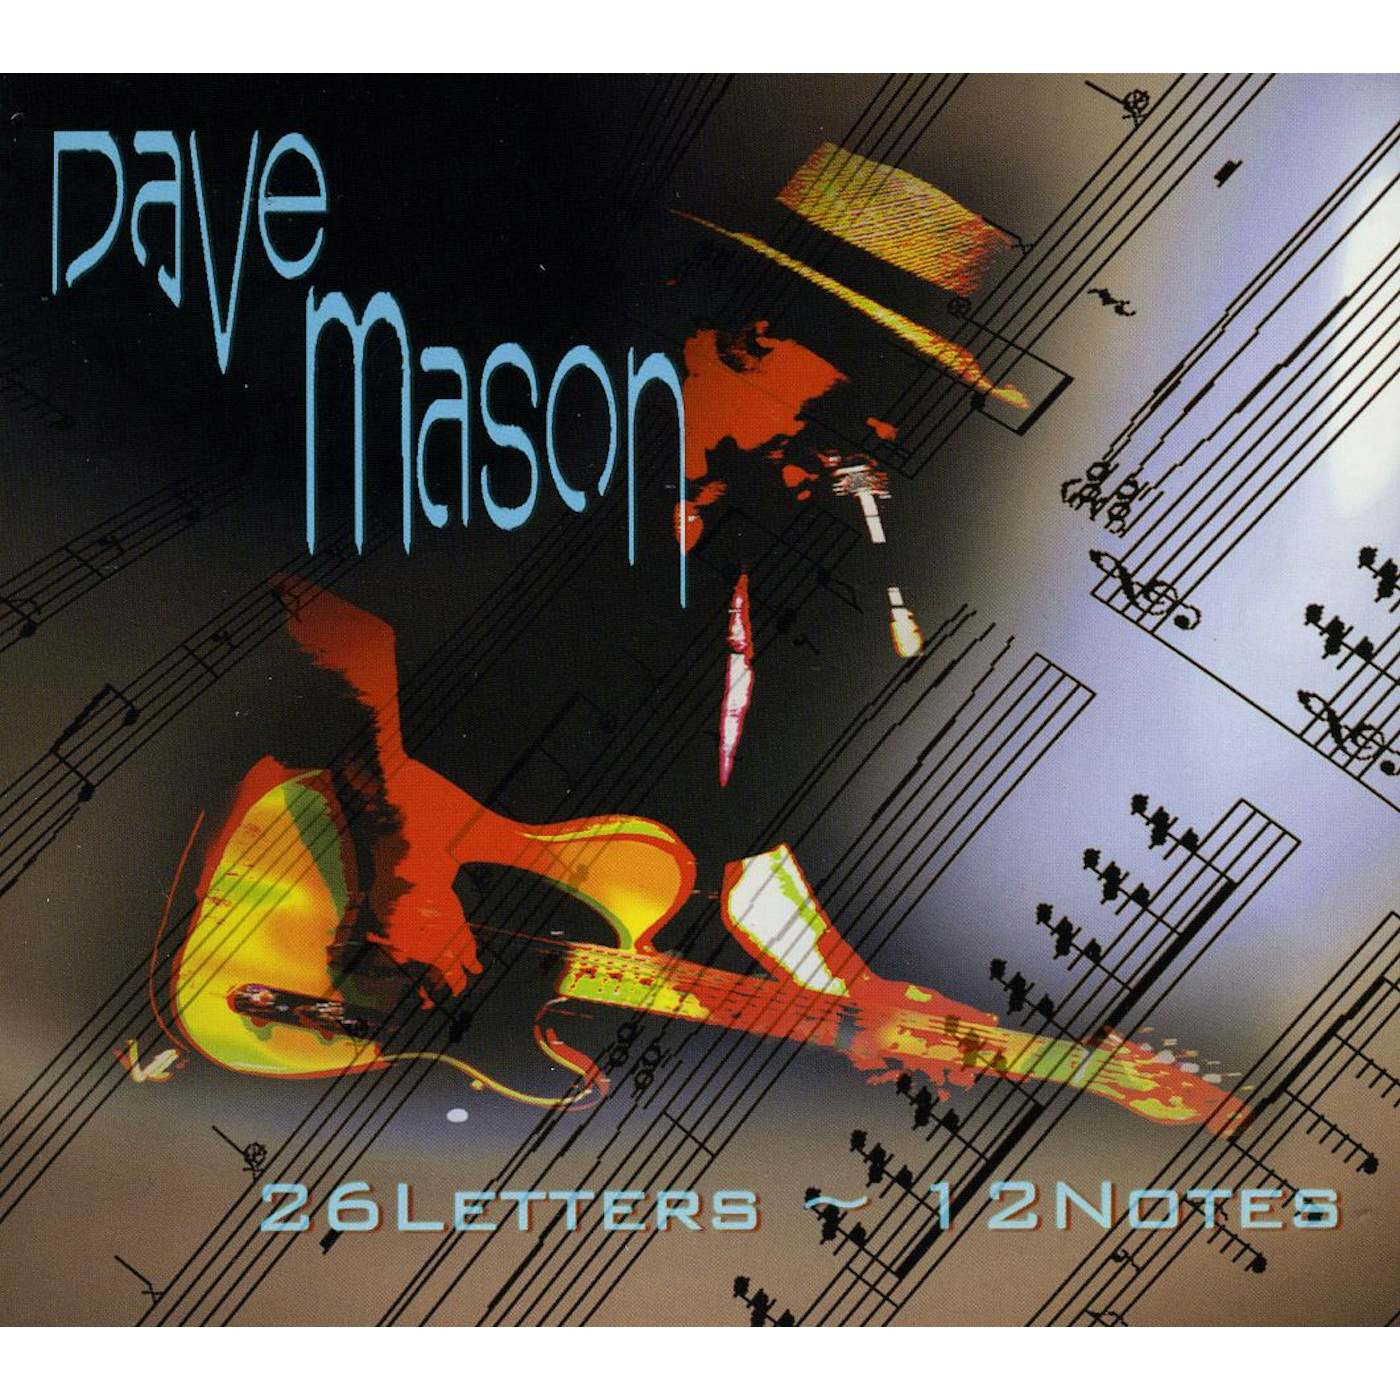 Dave Mason 26 LETTERS 12 NOTES CD